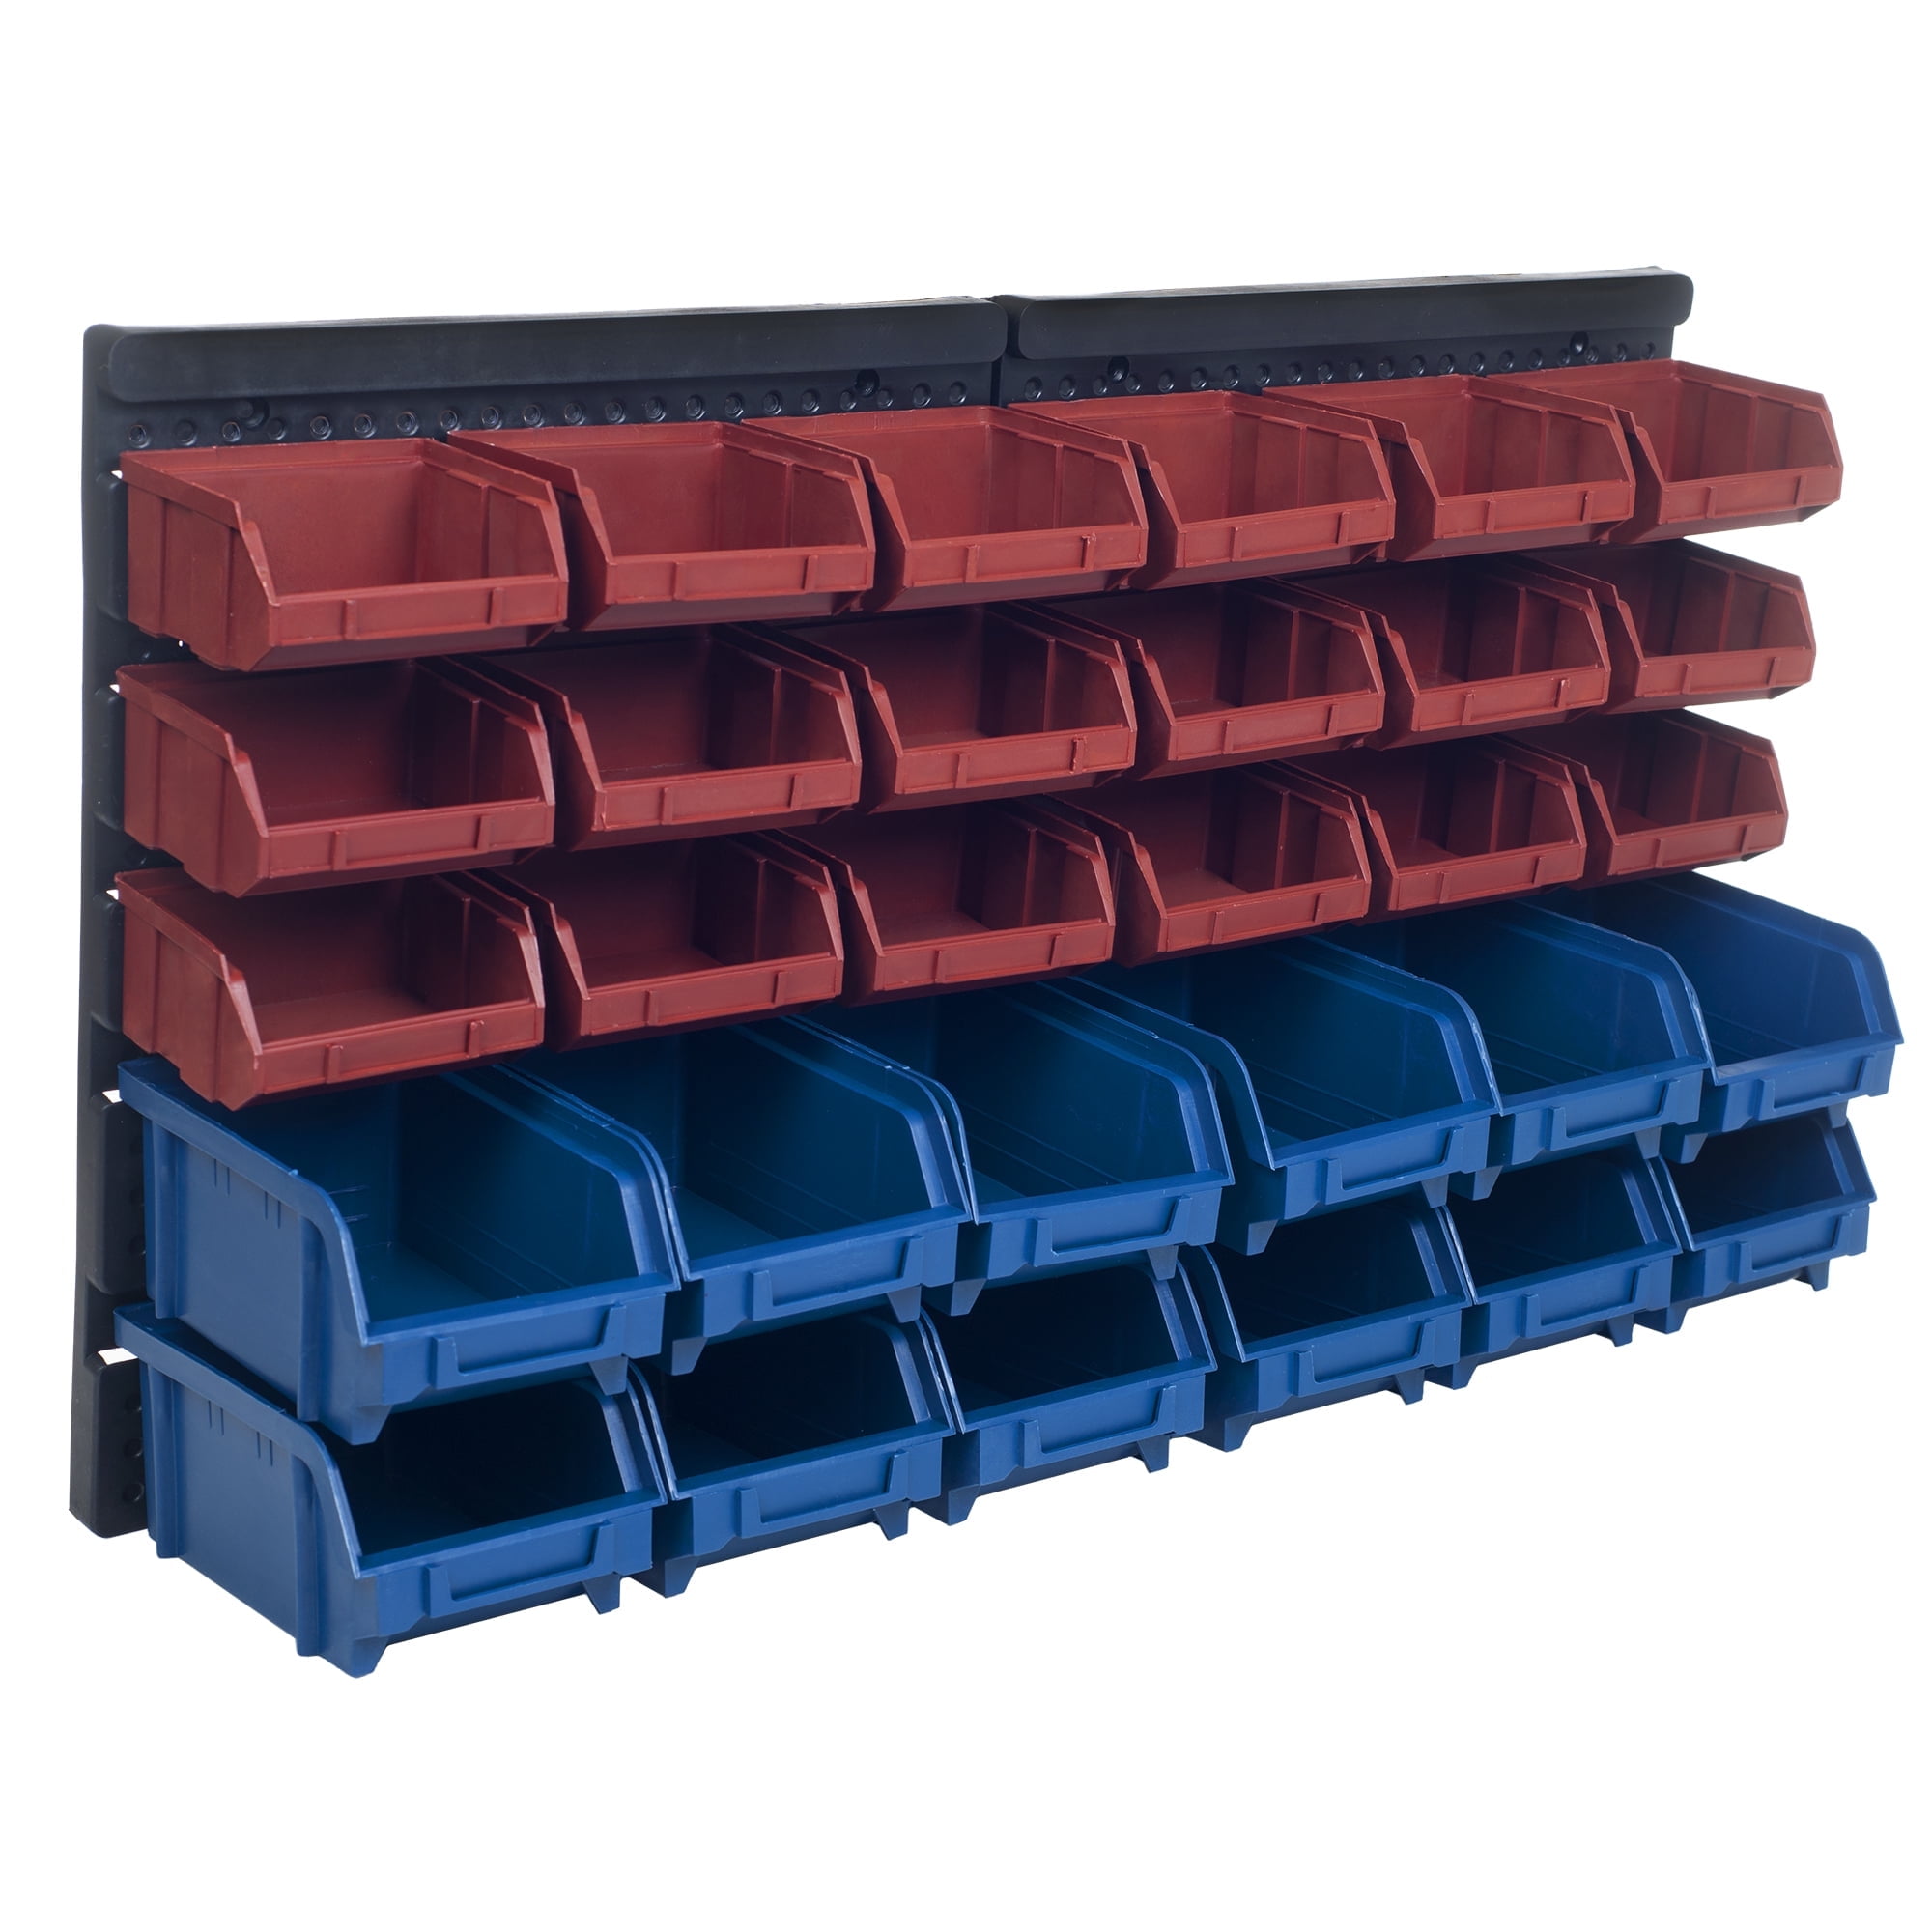 Drawer Storage Organizer - Plastic Drawers for Organization - Desktop or  Wall-Mounted Container by Stalwart - On Sale - Bed Bath & Beyond - 23008687